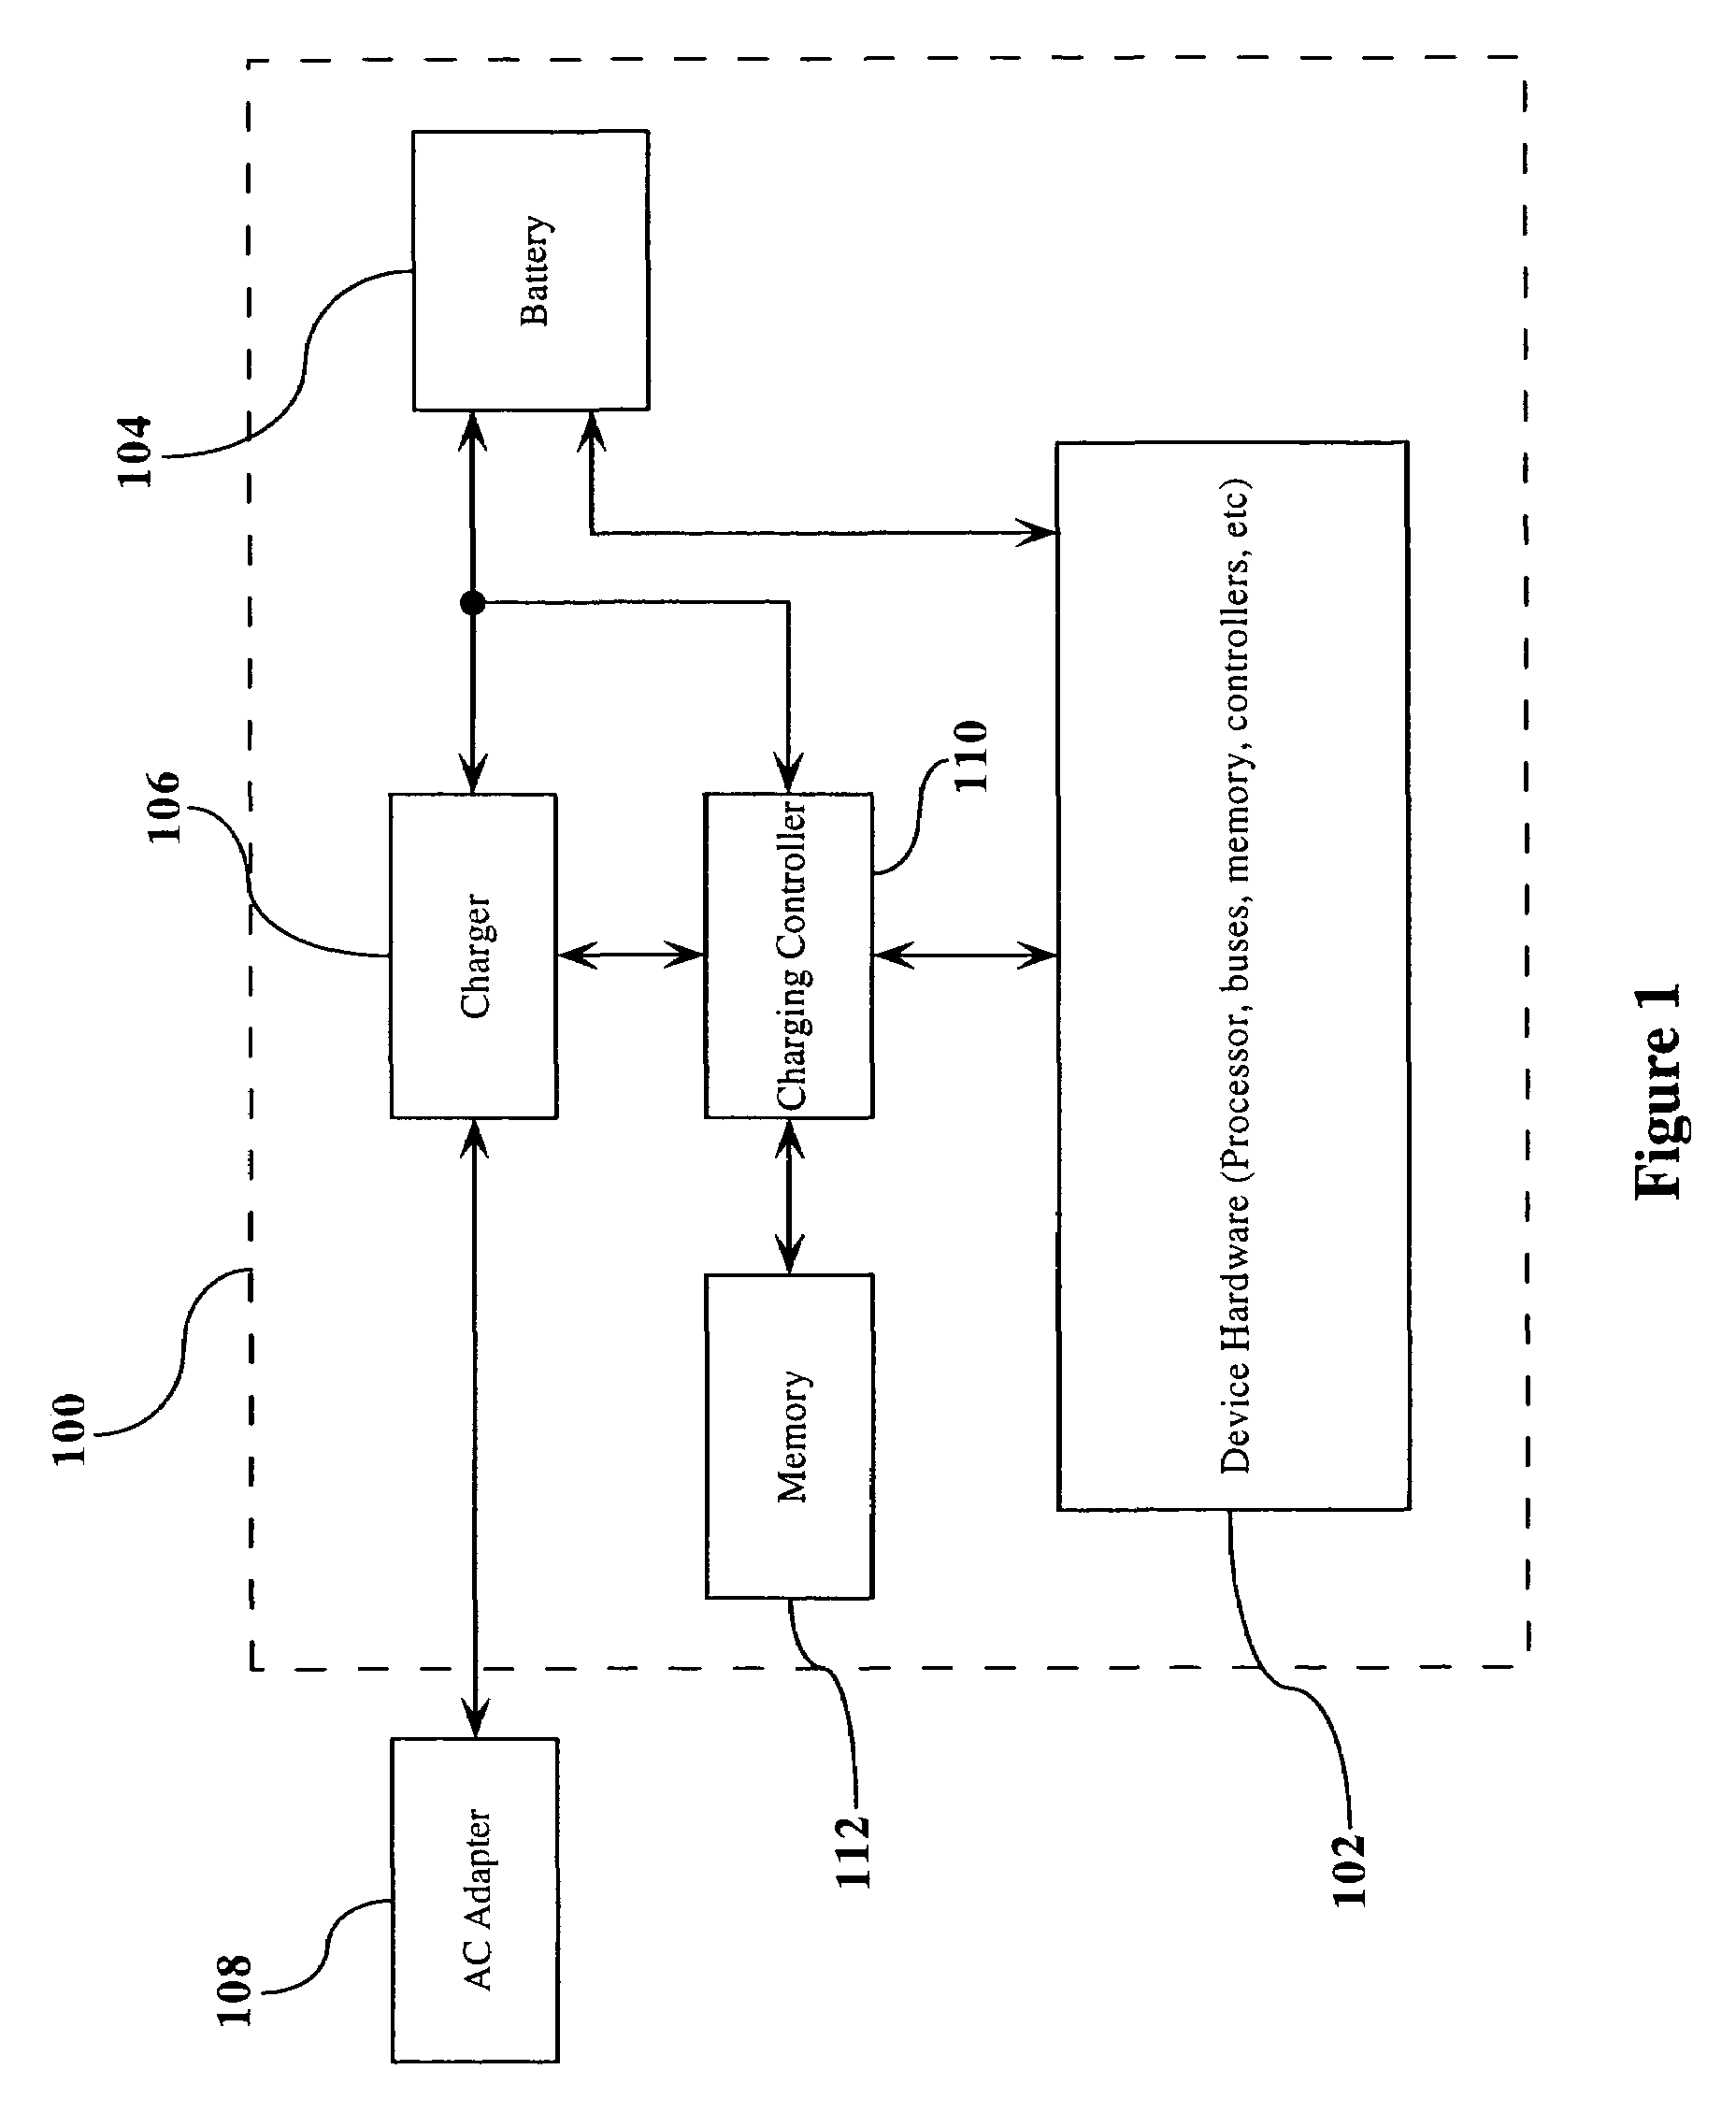 Smart battery charging system, method, and computer program product